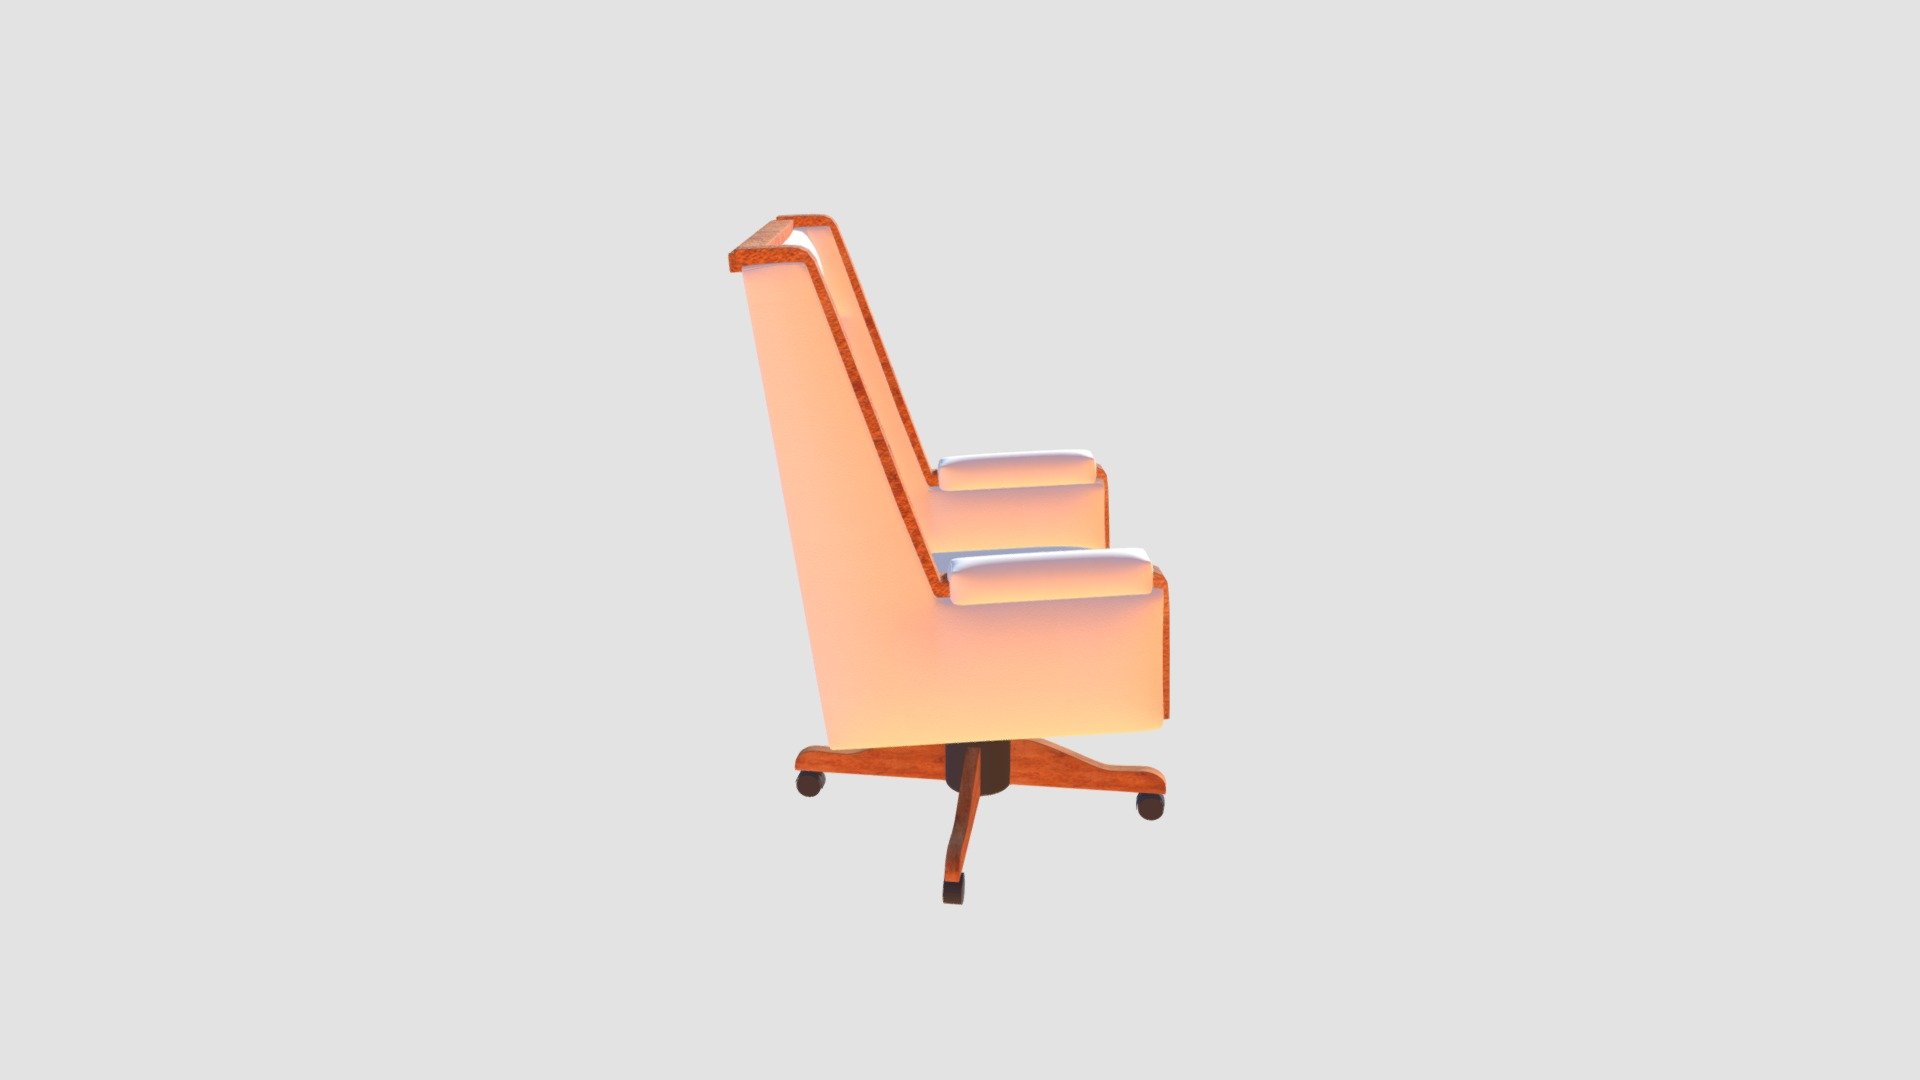 Highly detailed 3d model of armchair with all textures, shaders and materials. It is ready to use, just put it into your scene 3d model